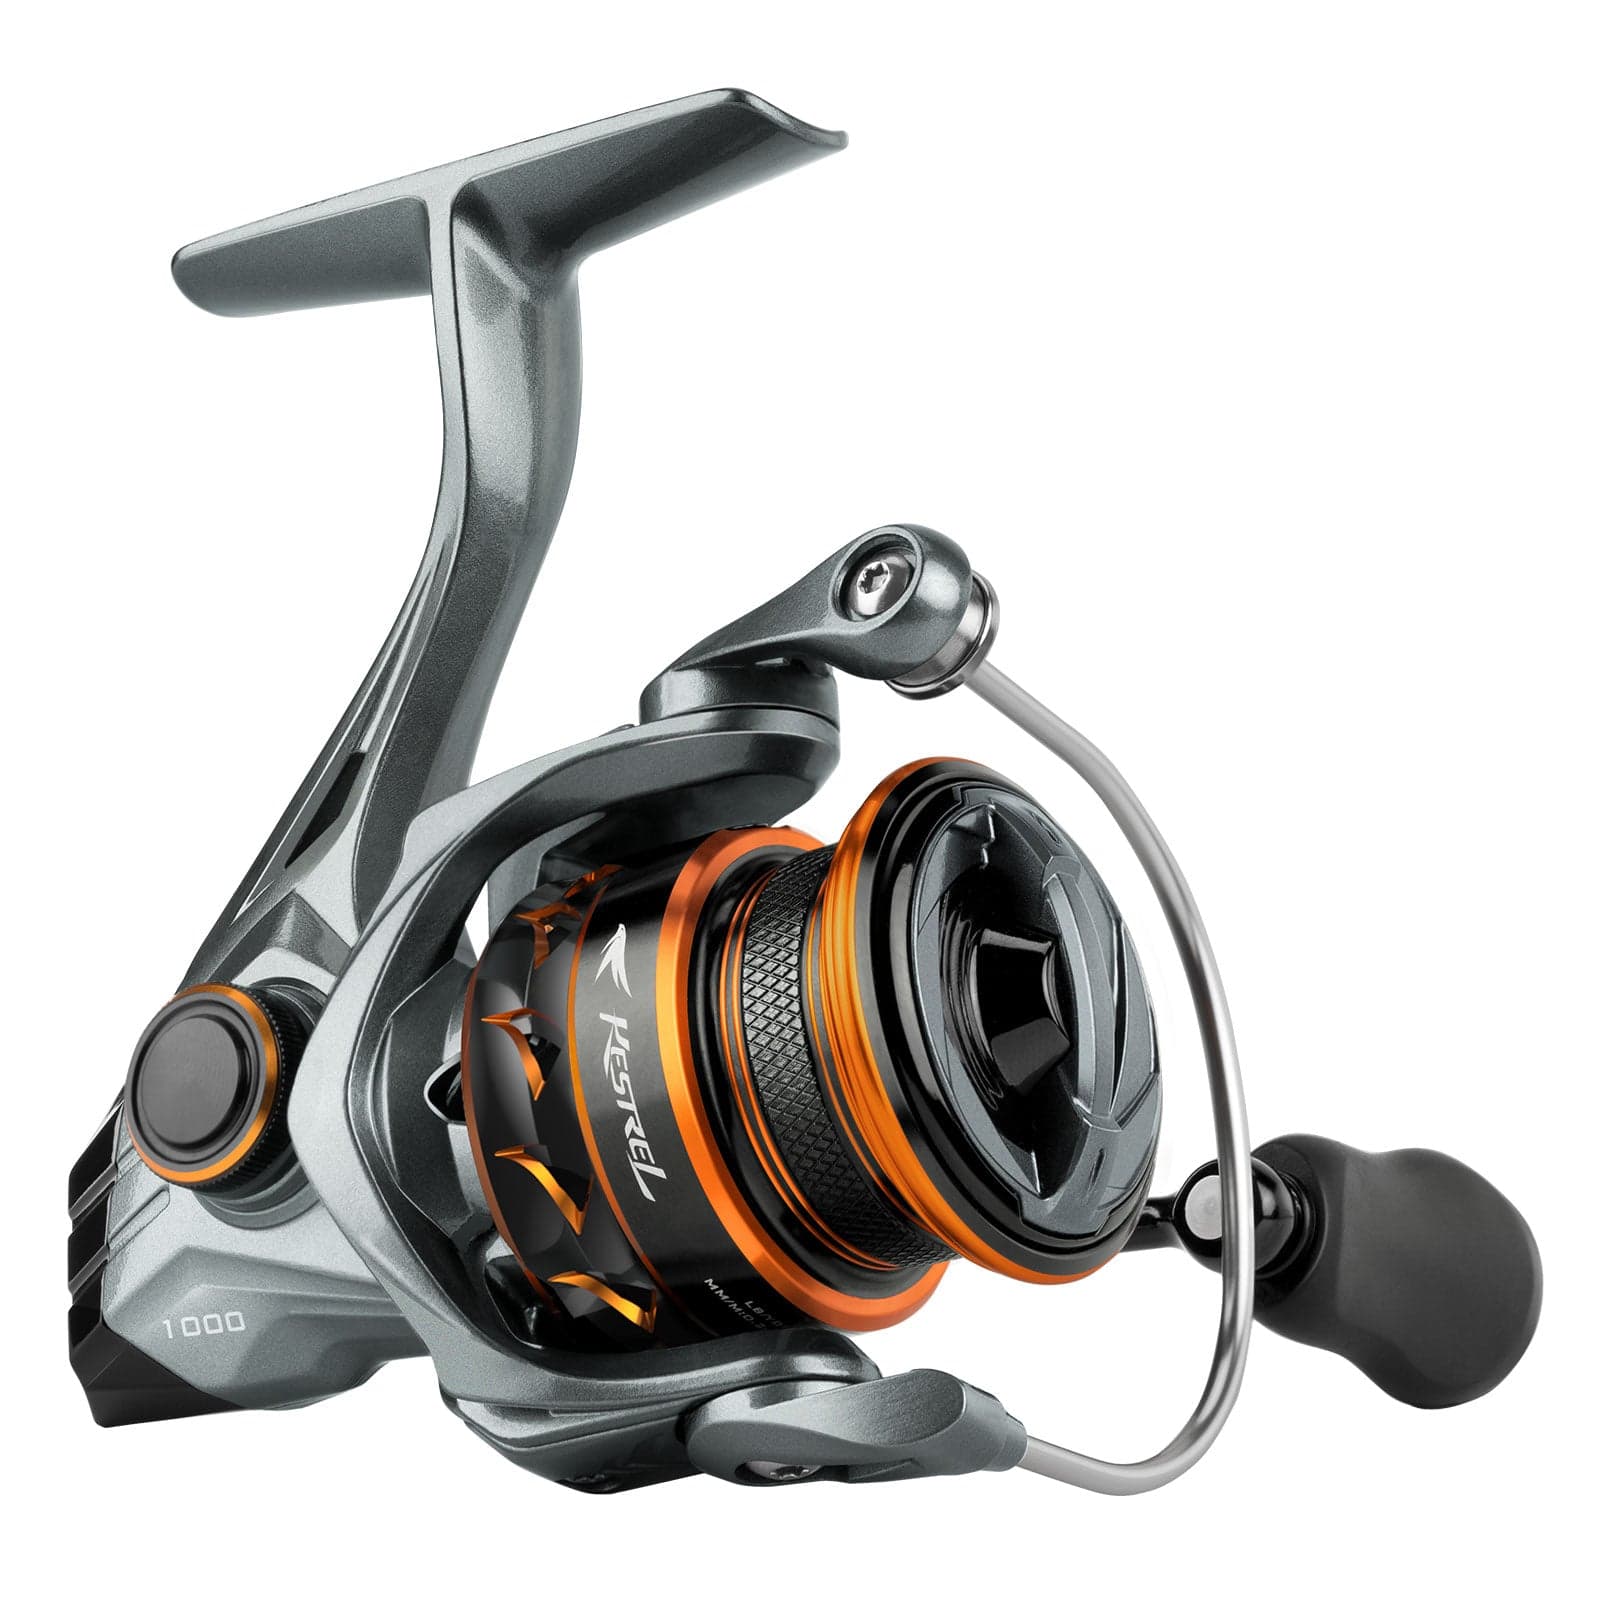 Kastking Kestrel Reel Released in April. I am making a review video of it.  Anybody interested it too? : r/BFSfishing